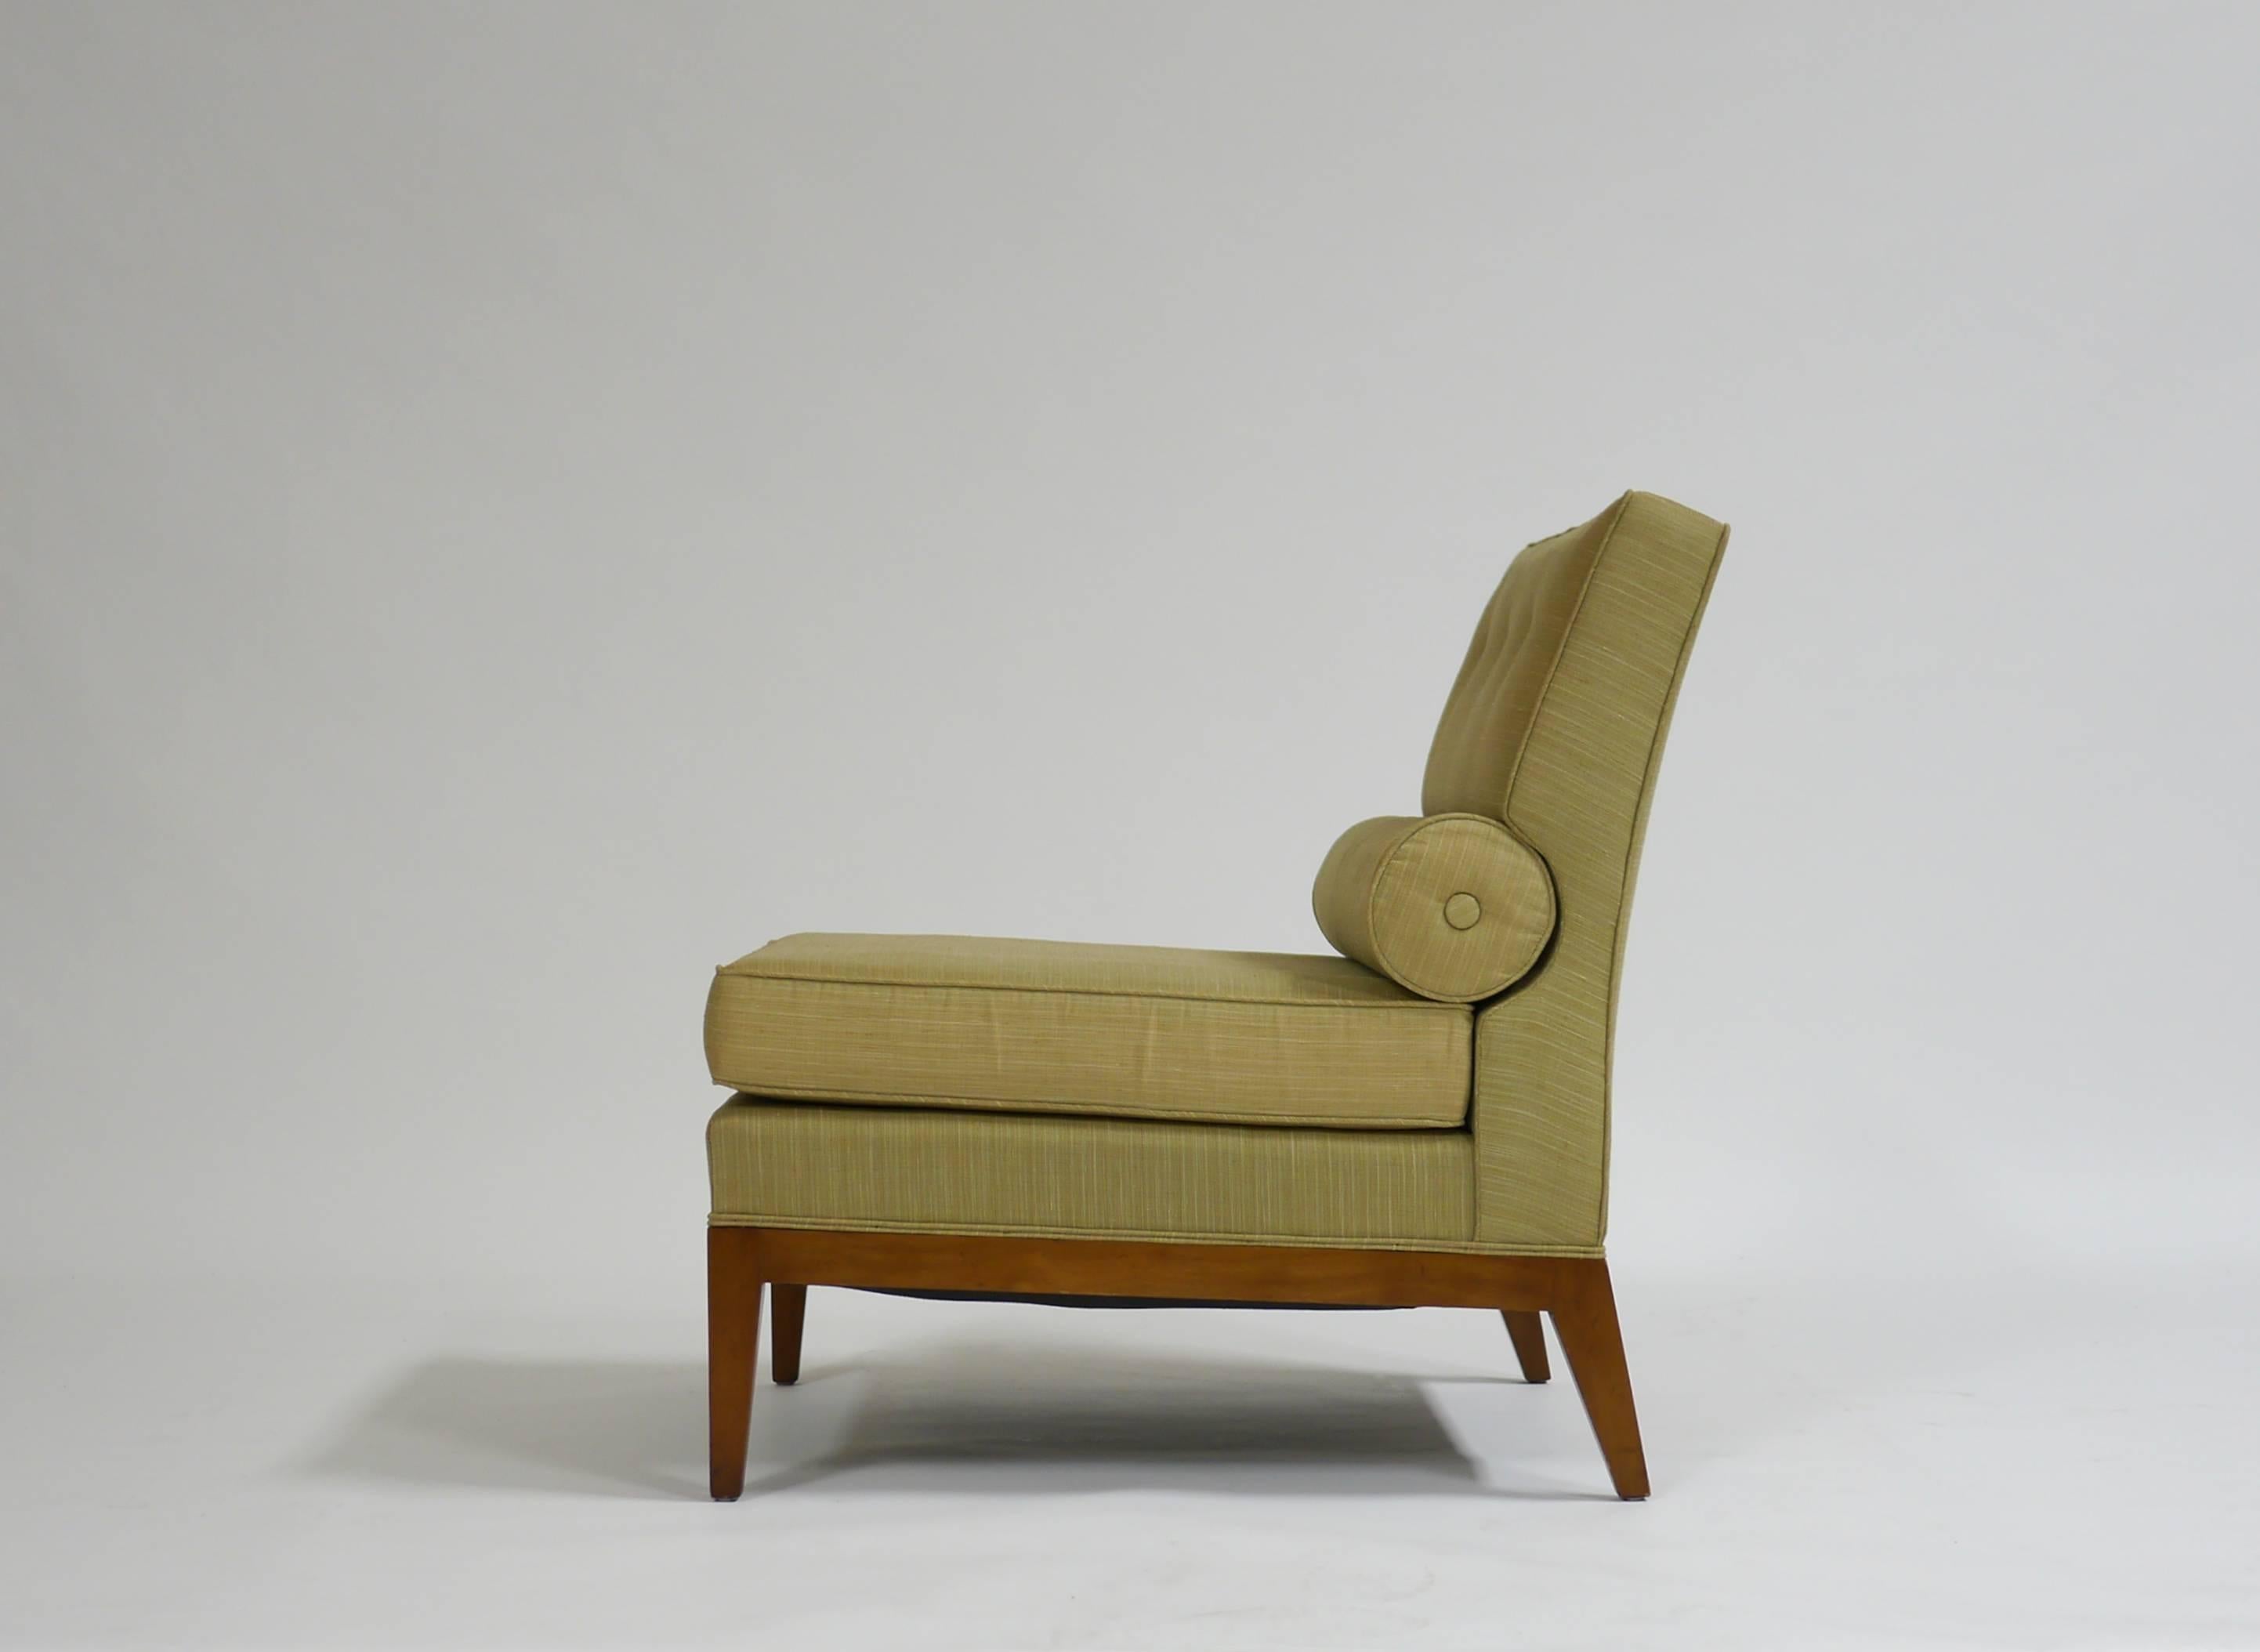 Rare to market lounge chair by Tommi Parzinger for Charak Modern.